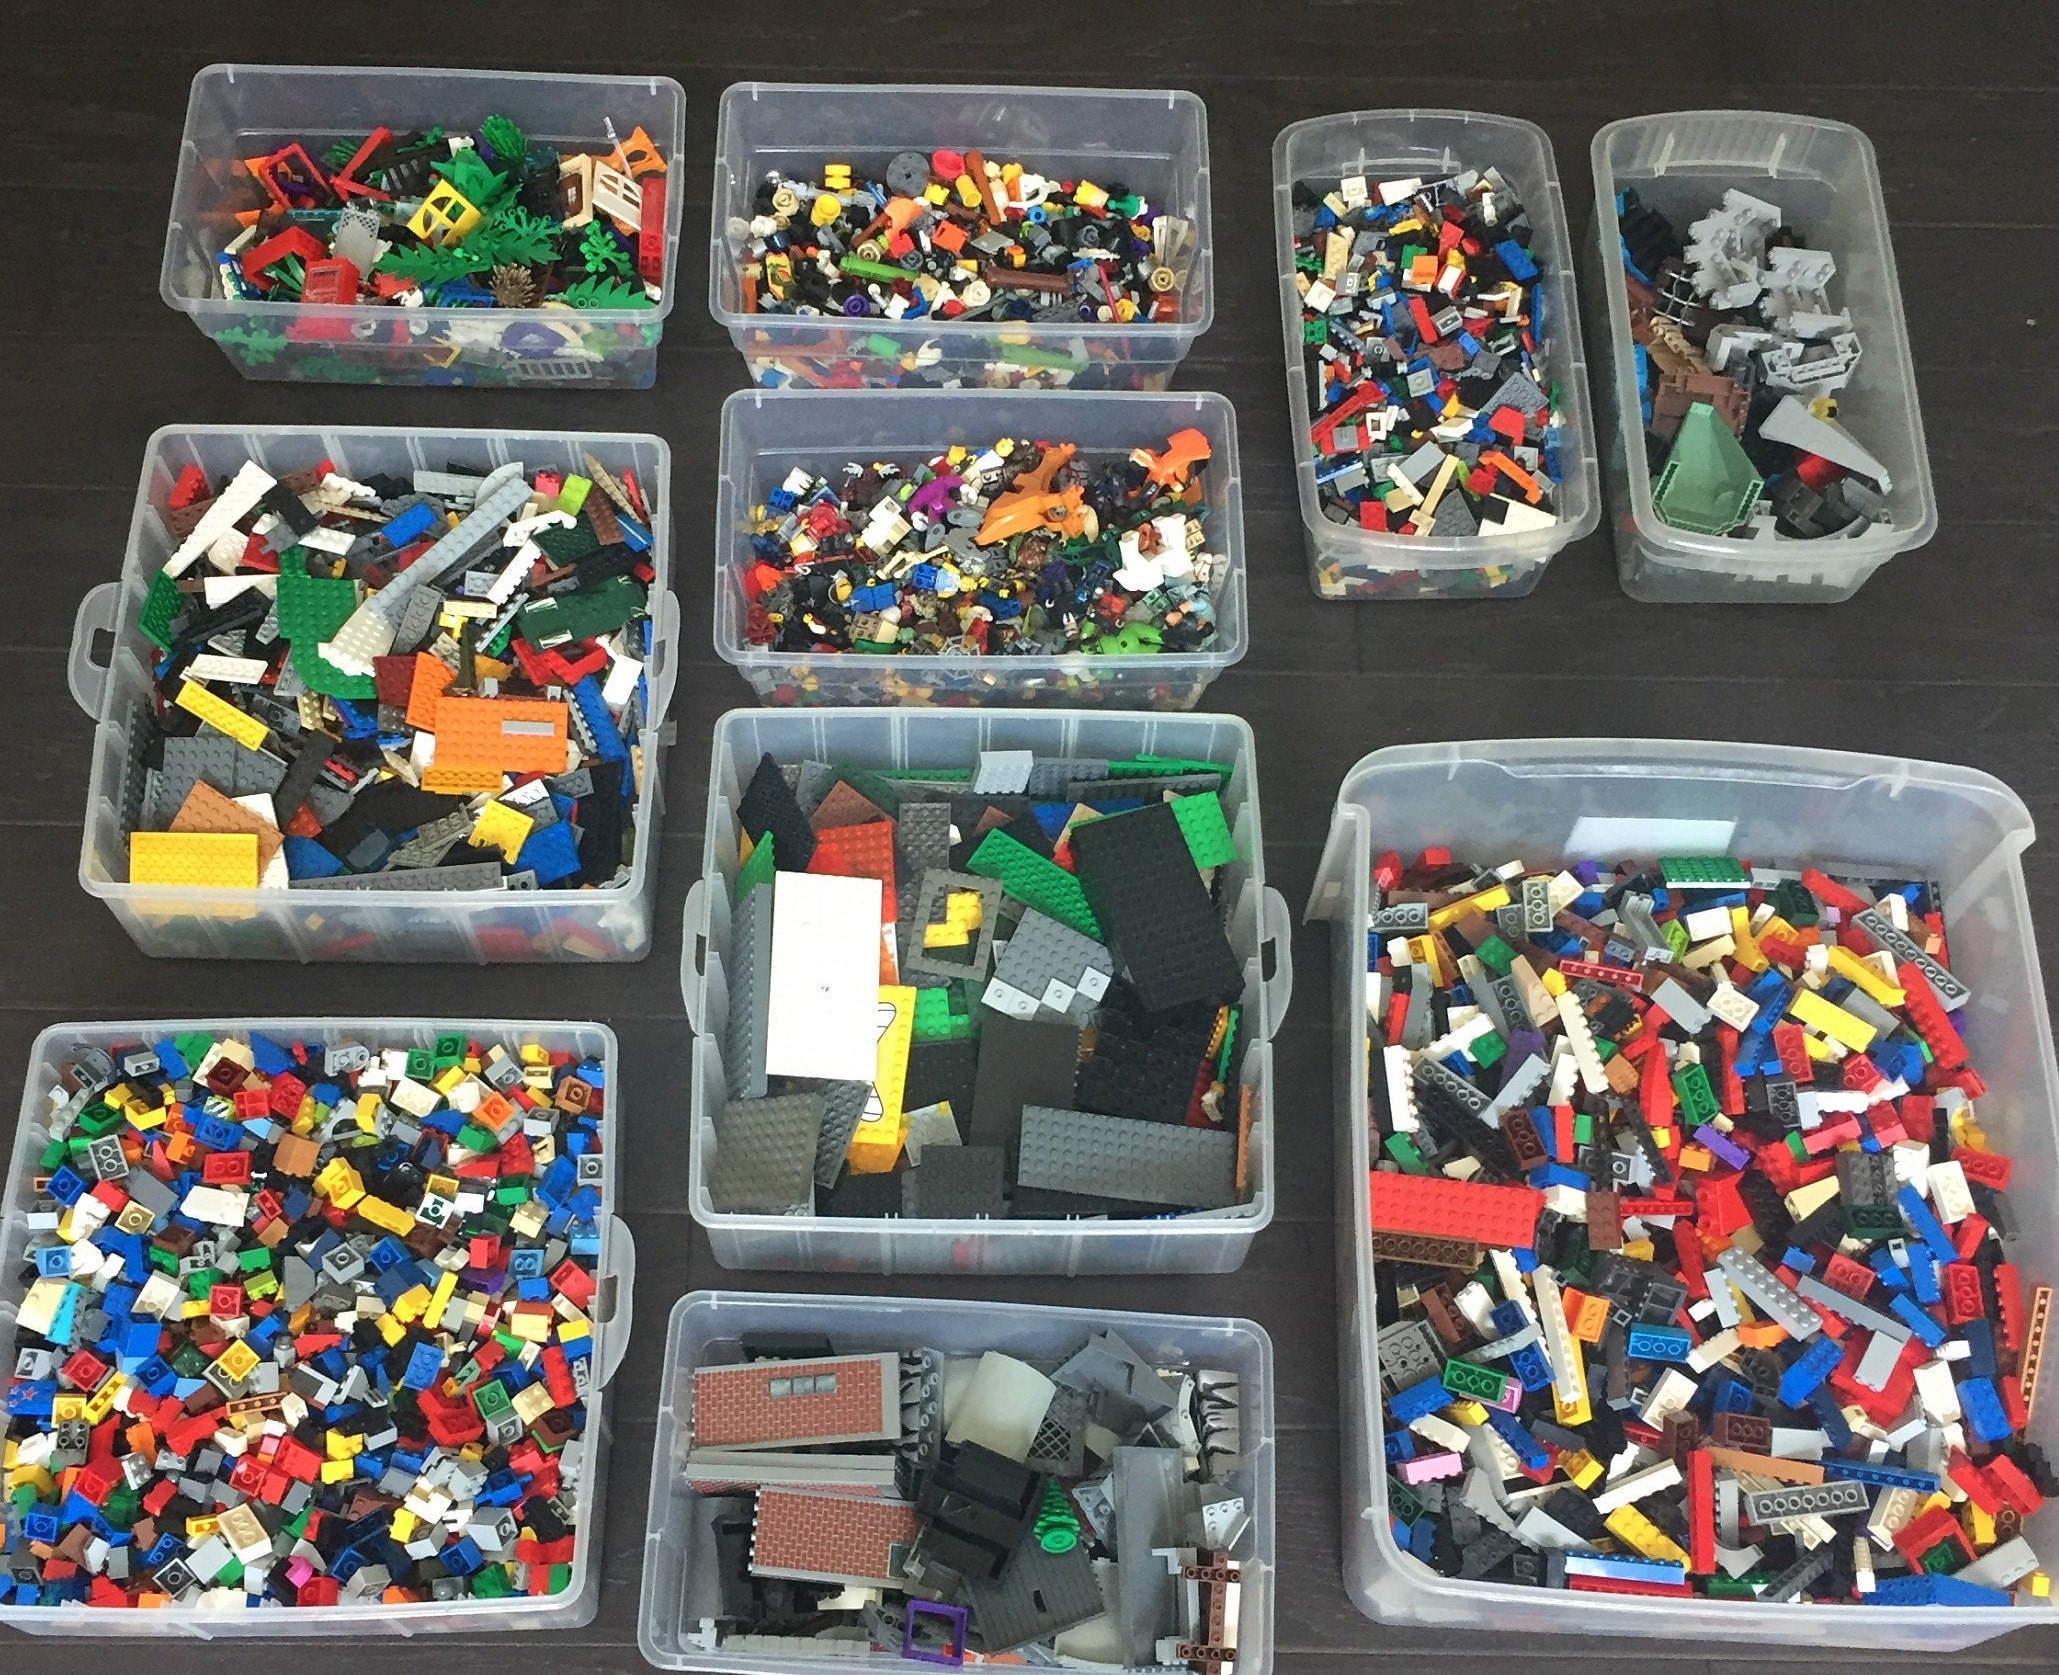 Pieces and Toy Parts 3 Lb Bulk Lot of Assorted LEGO Star Wars Bricks 